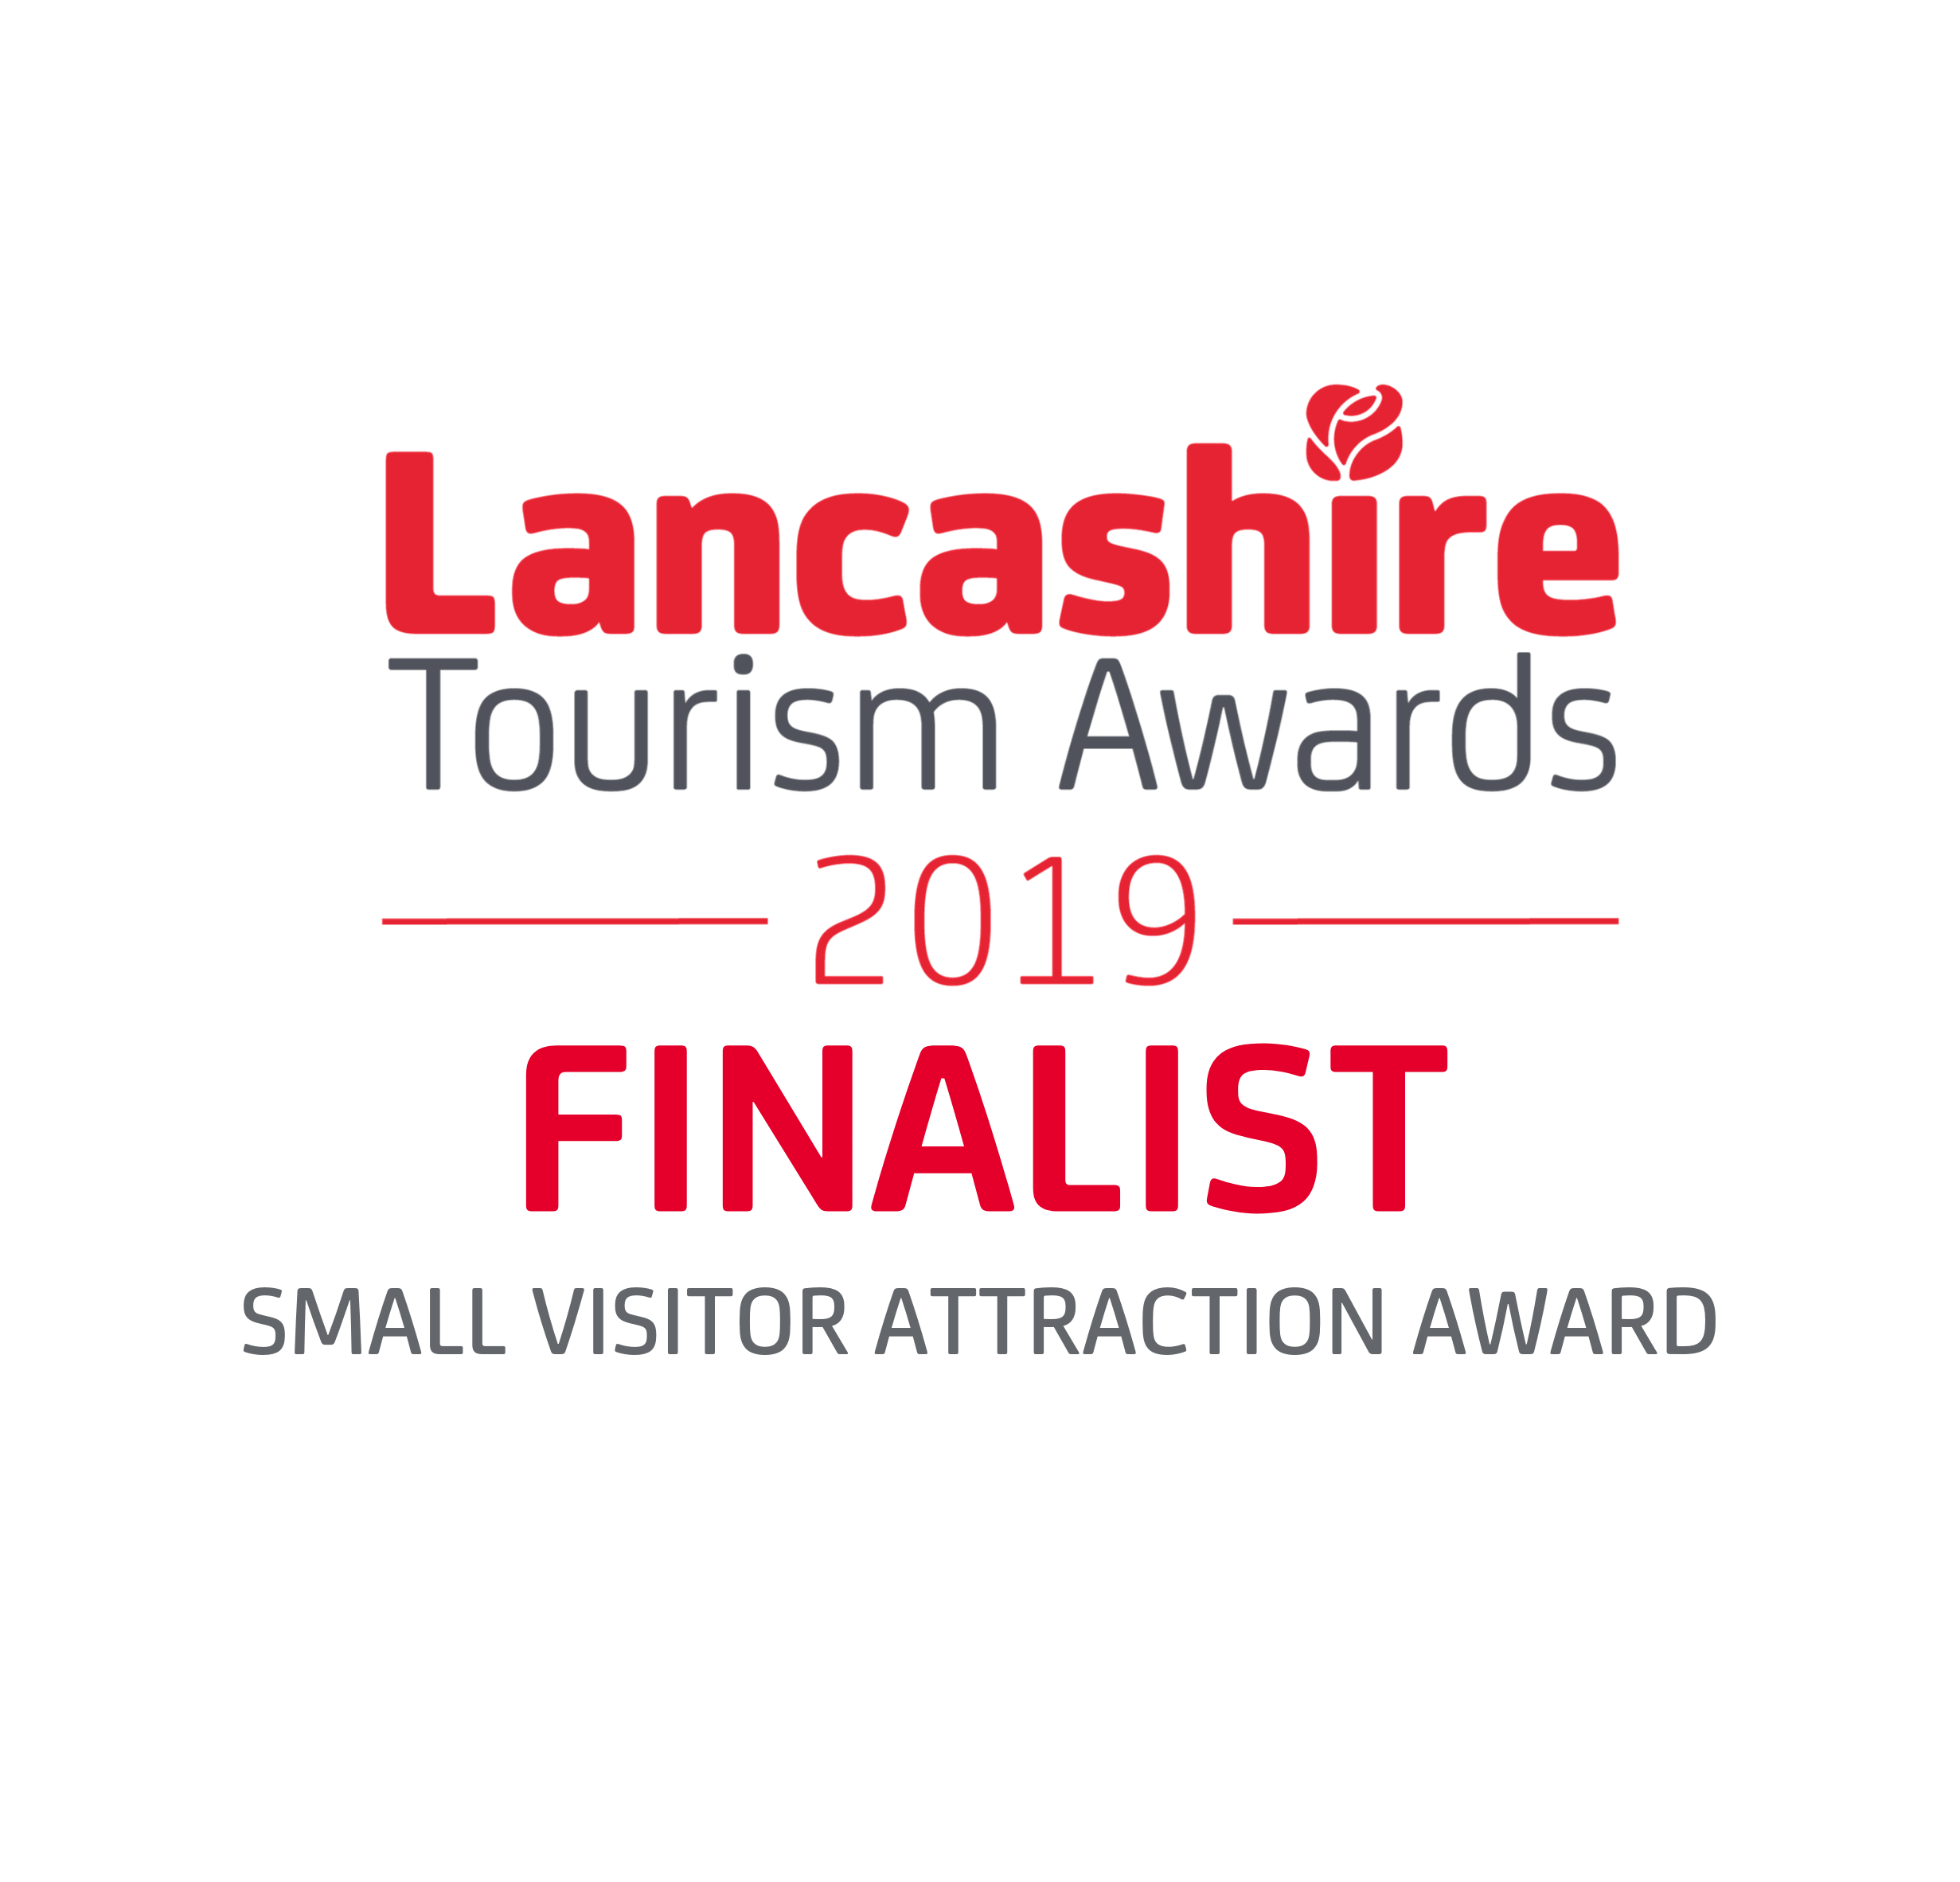 Lancashire Tourism Awards Finalist 2019 SMALL VISITOR ATTRACTION